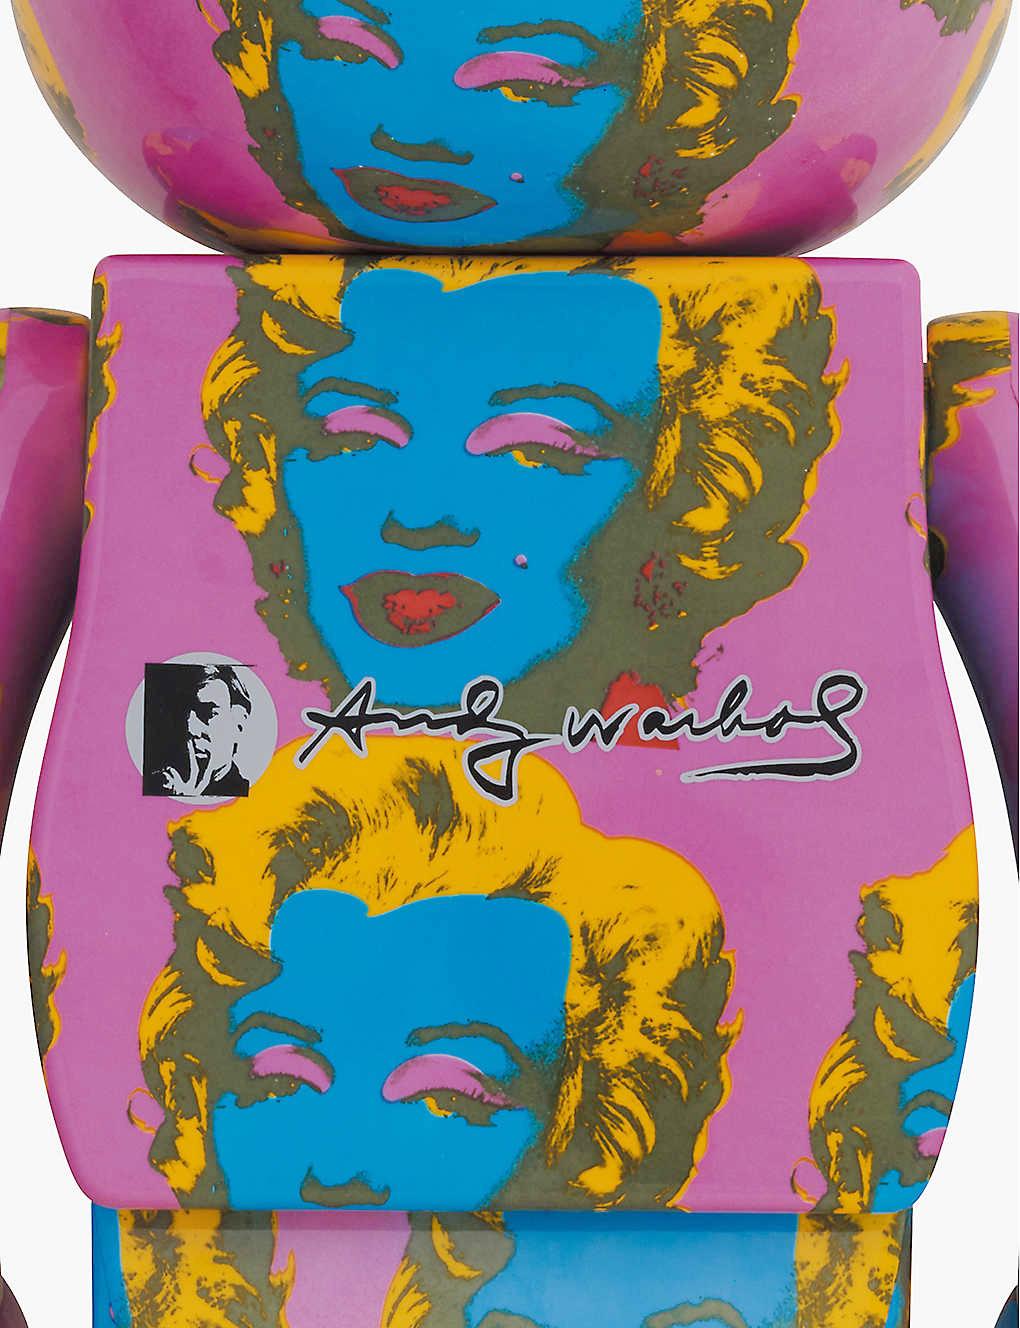 Andy Warhol Marilyn Bearbrick 400% set of 2 (Warhol BE@RBRICK 400%) - Pop Art Print by (after) Andy Warhol